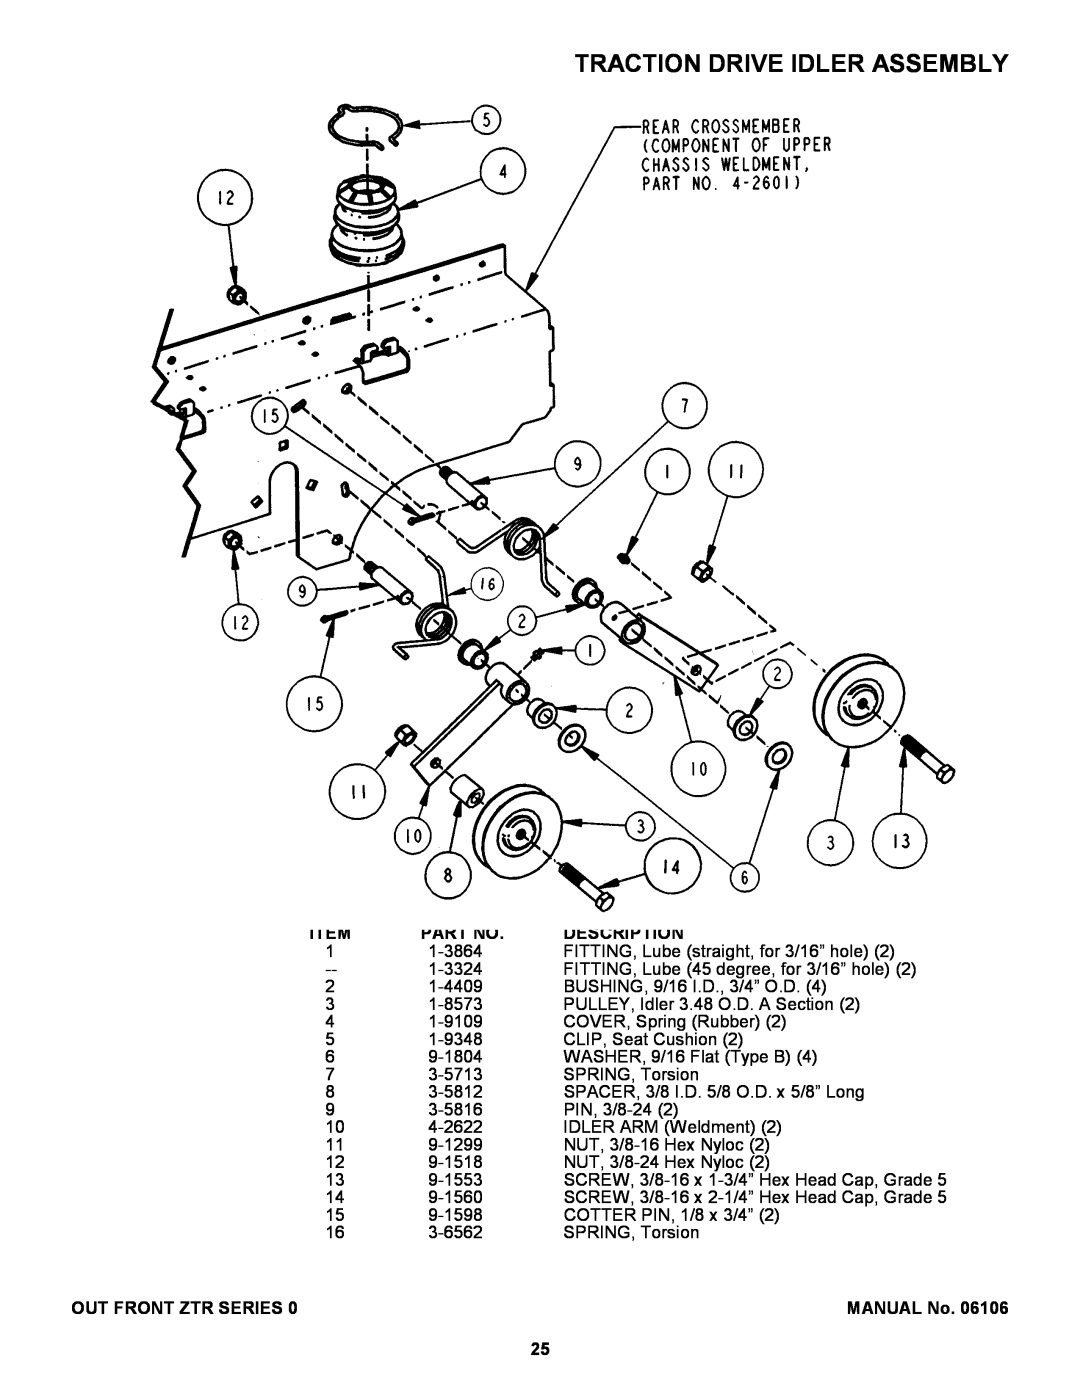 Snapper ZF2500KH, ZF2200K manual Traction Drive Idler Assembly, Description, Out Front Ztr Series, MANUAL No 